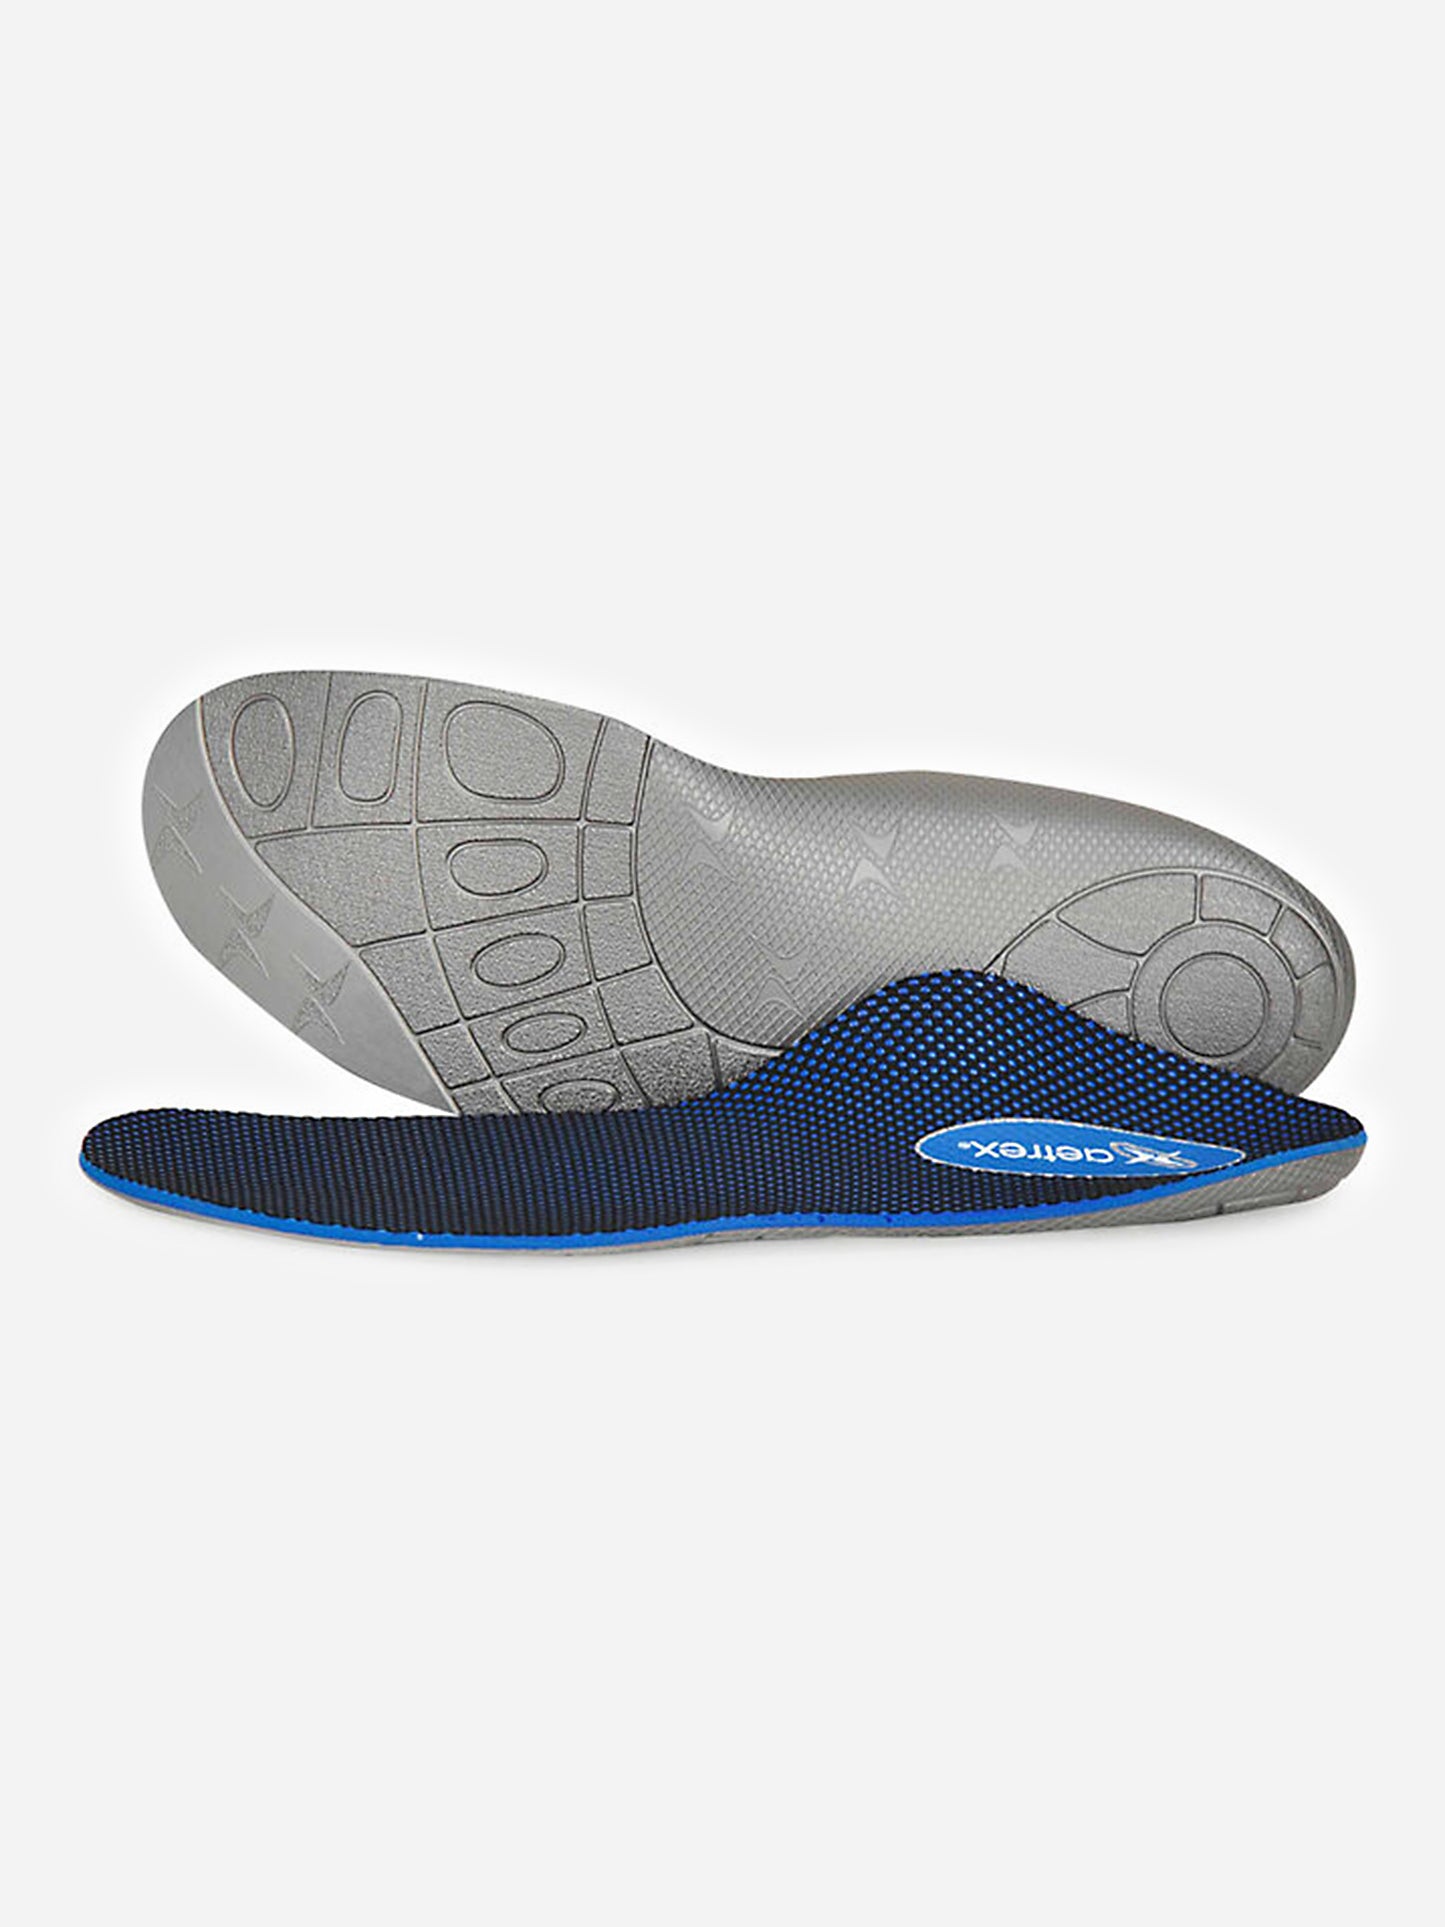 Aetrex Speed Posted Orthotics Insole